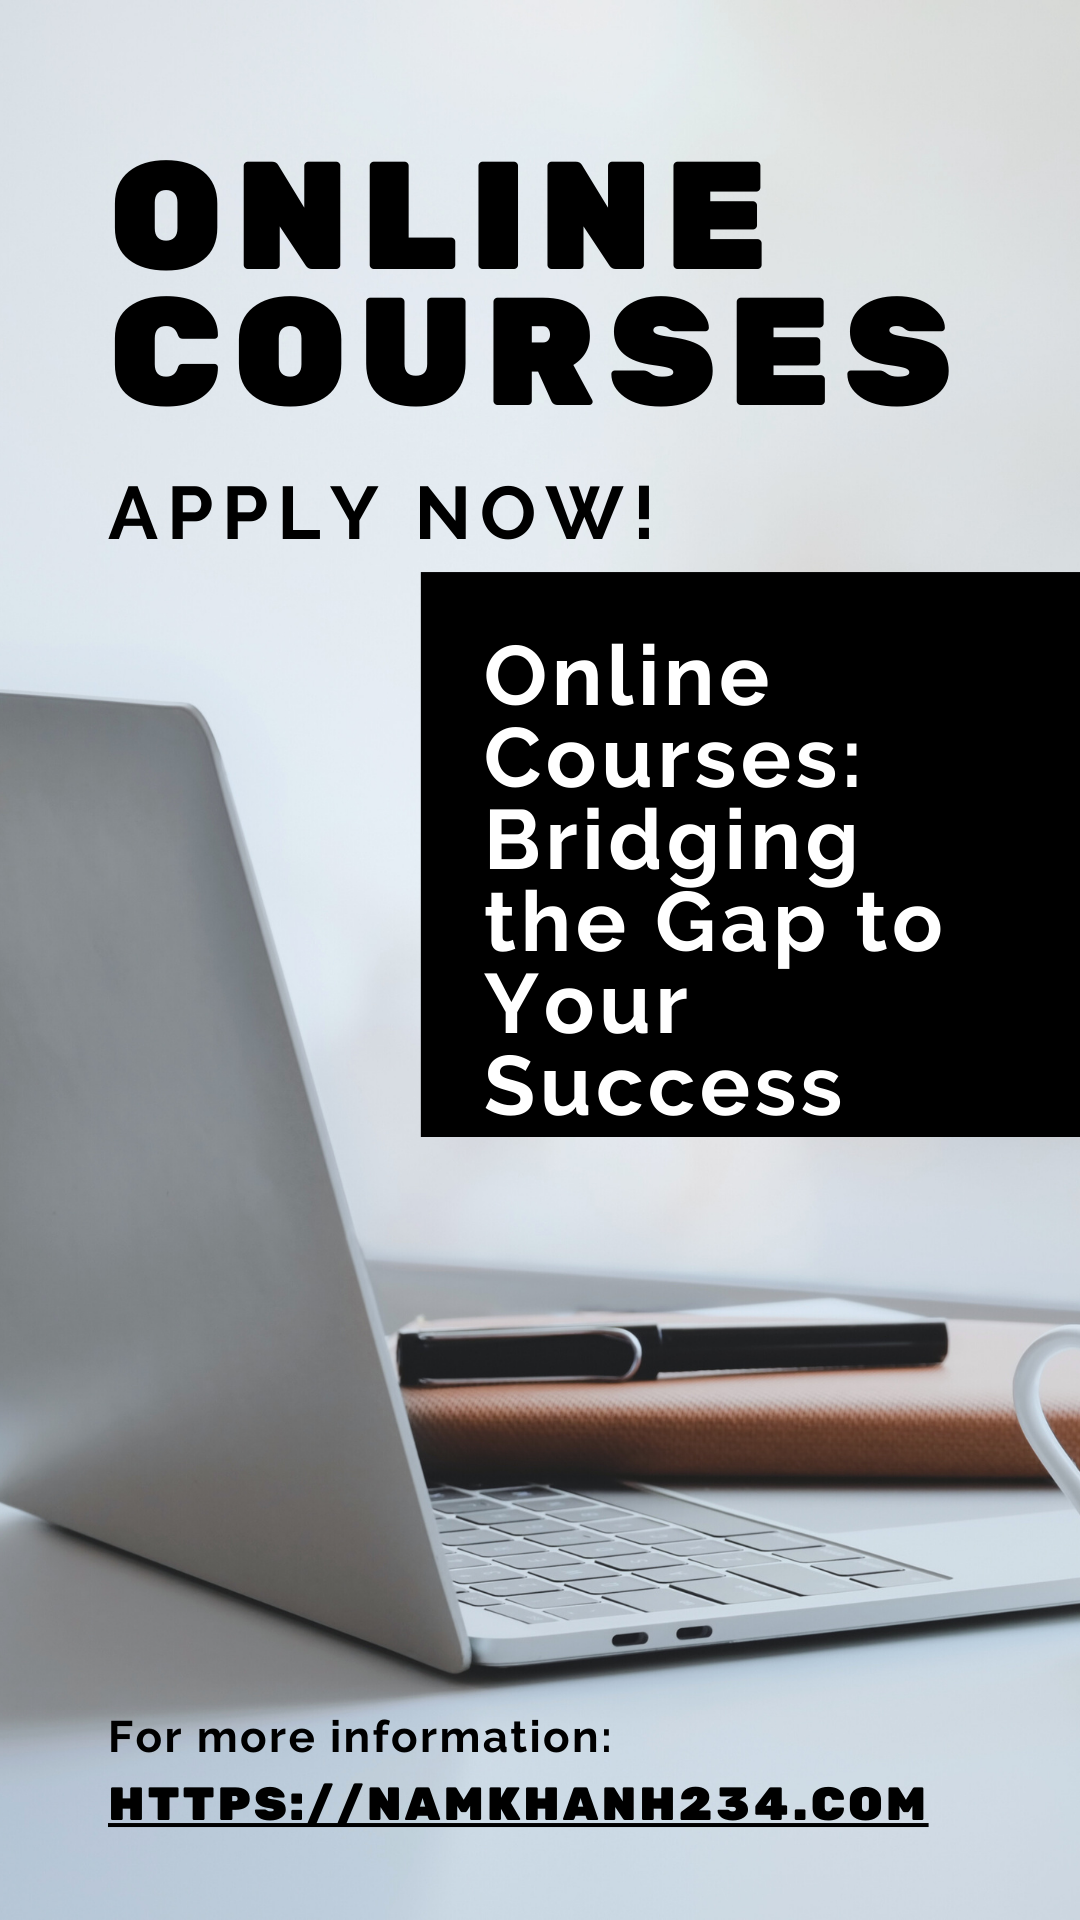 The world is constantly evolving, with new technologies and industries emerging. Online courses empower you to stay relevant and adaptable in this ever-changing landscape. They equip you with the skills and knowledge needed to thrive in a dynamic job market.